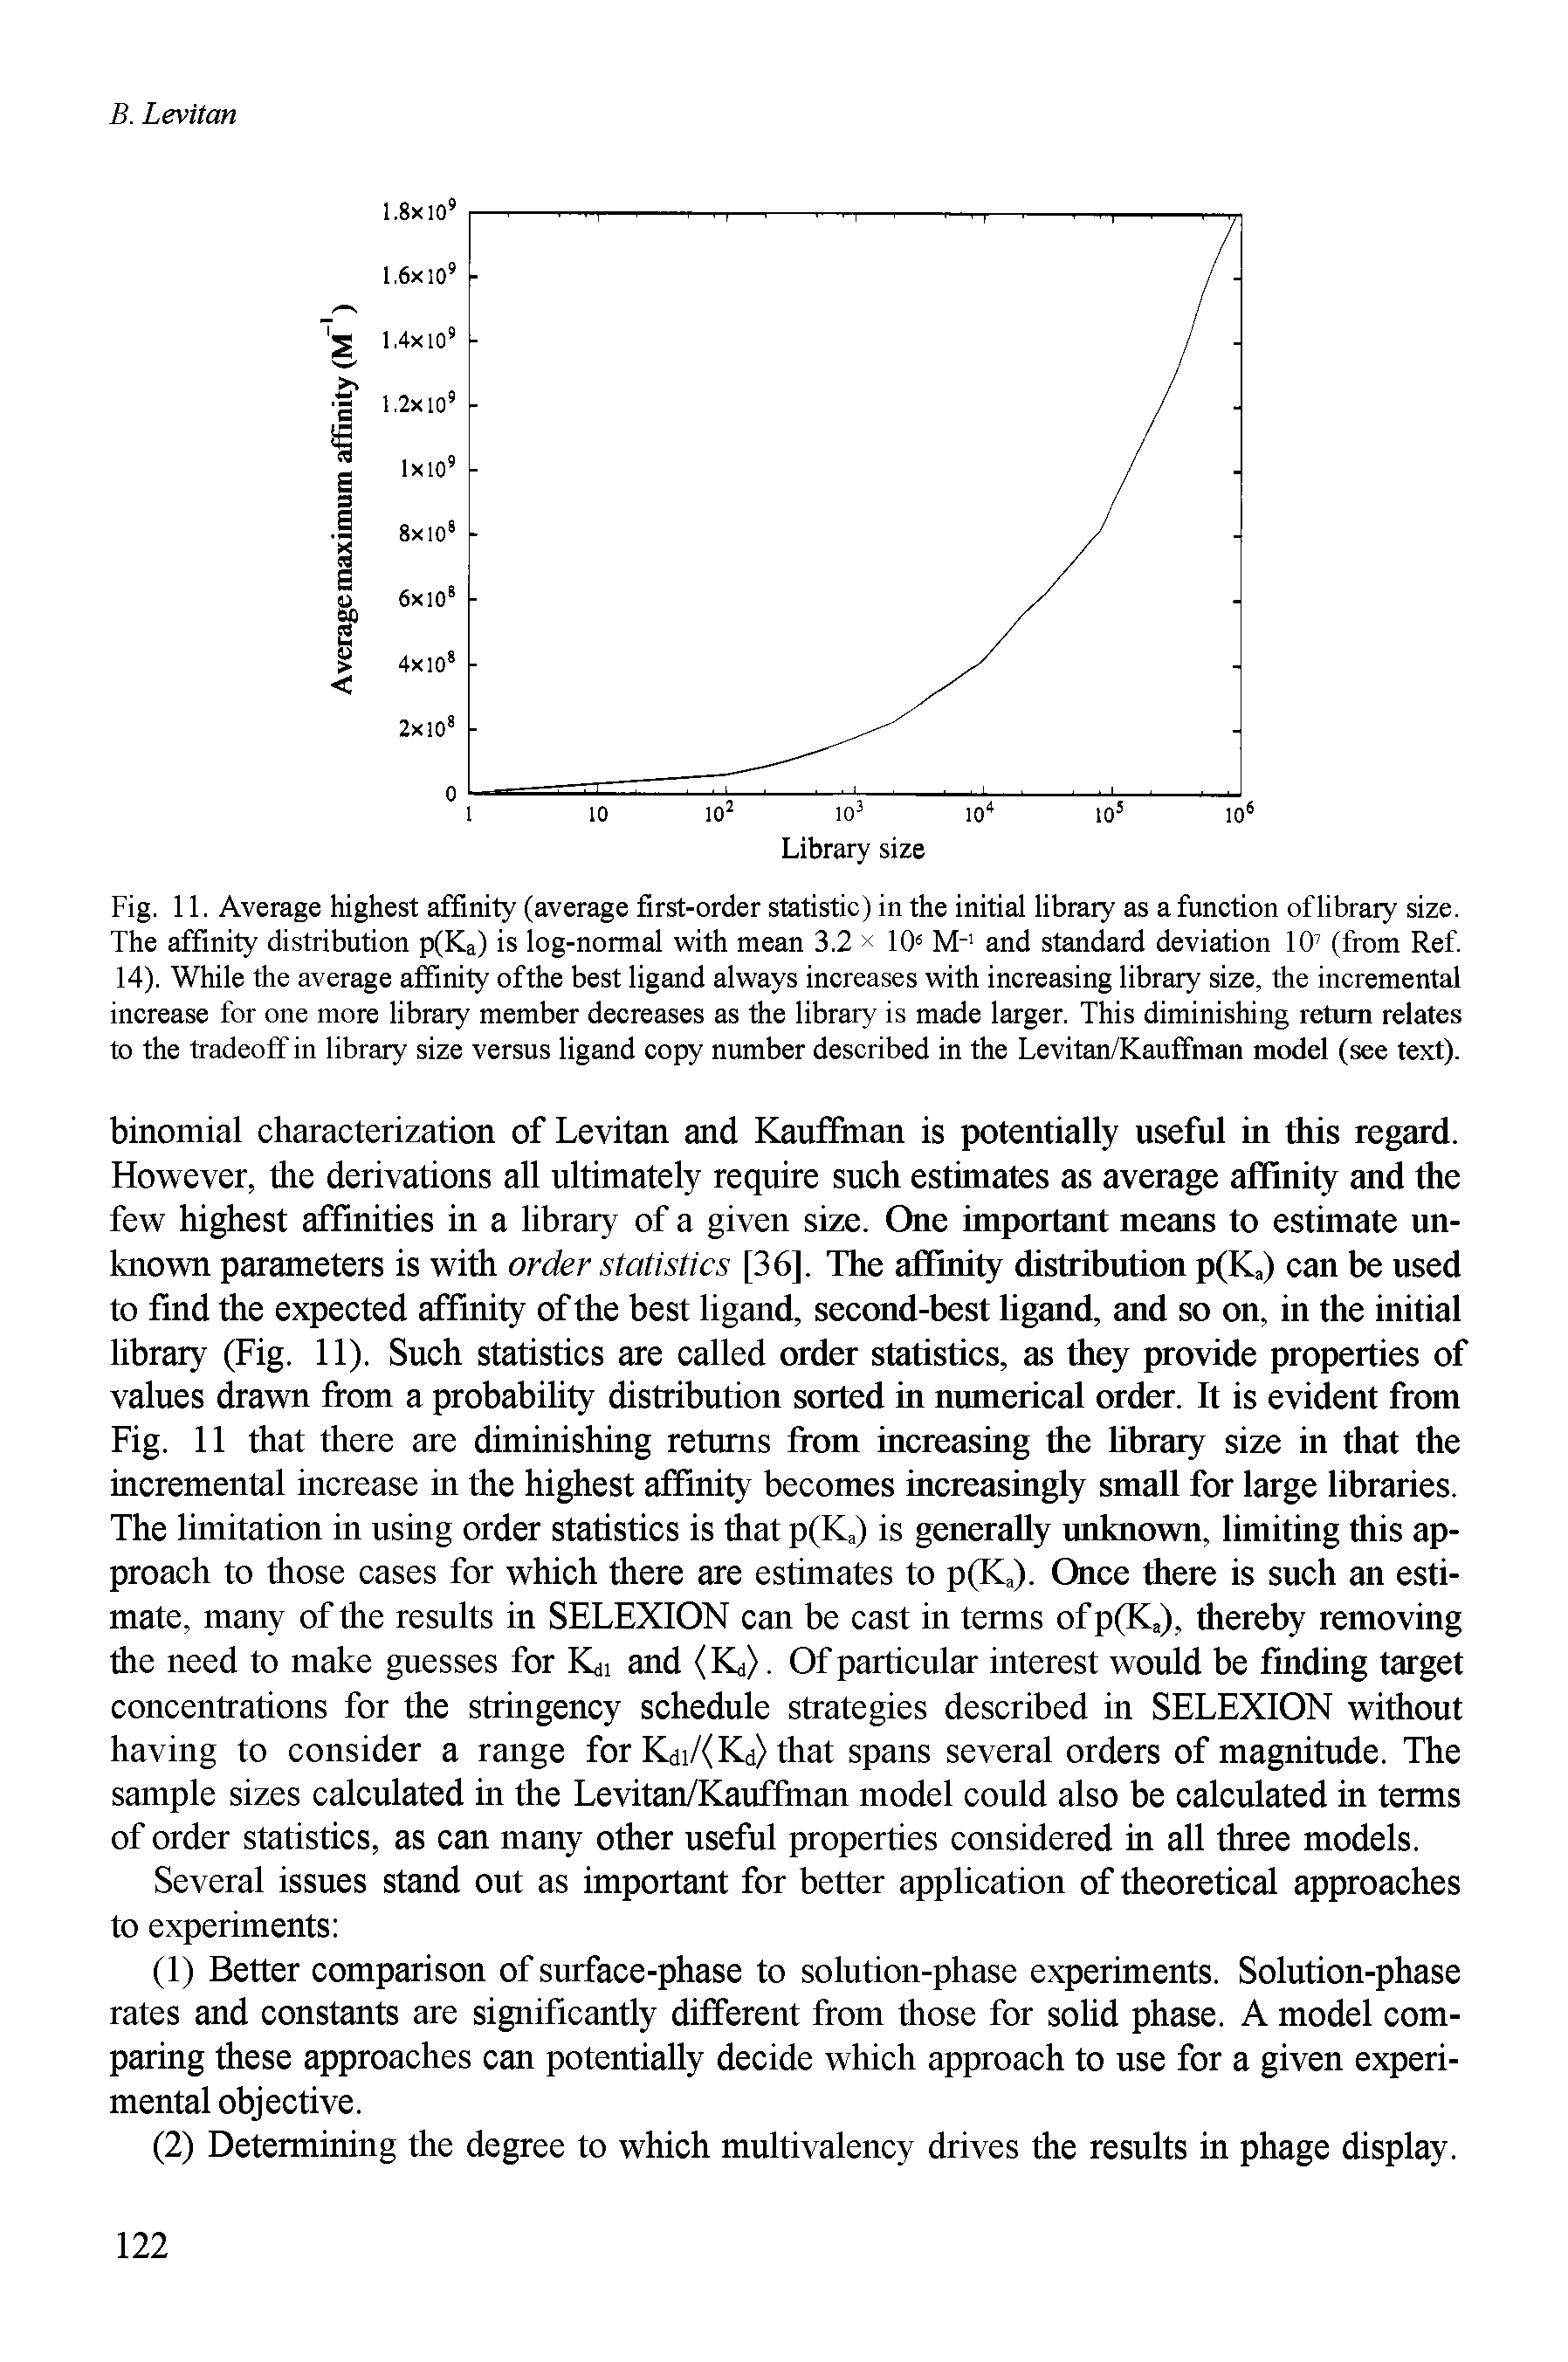 Fig. 11. Average highest affinity (average first-order statistic) in the initial library as a function of library size. The affinity distribution p(Ka) is log-normal with mean 3.2 x 106 M and standard deviation 107 (from Ref. 14). While the average affinity ofthe best ligand always increases with increasing library size, the incremental increase for one more library member decreases as the library is made larger. This diminishing return relates to the tradeoff in library size versus ligand copy number described in the Levitan/Kauffman model (see text).